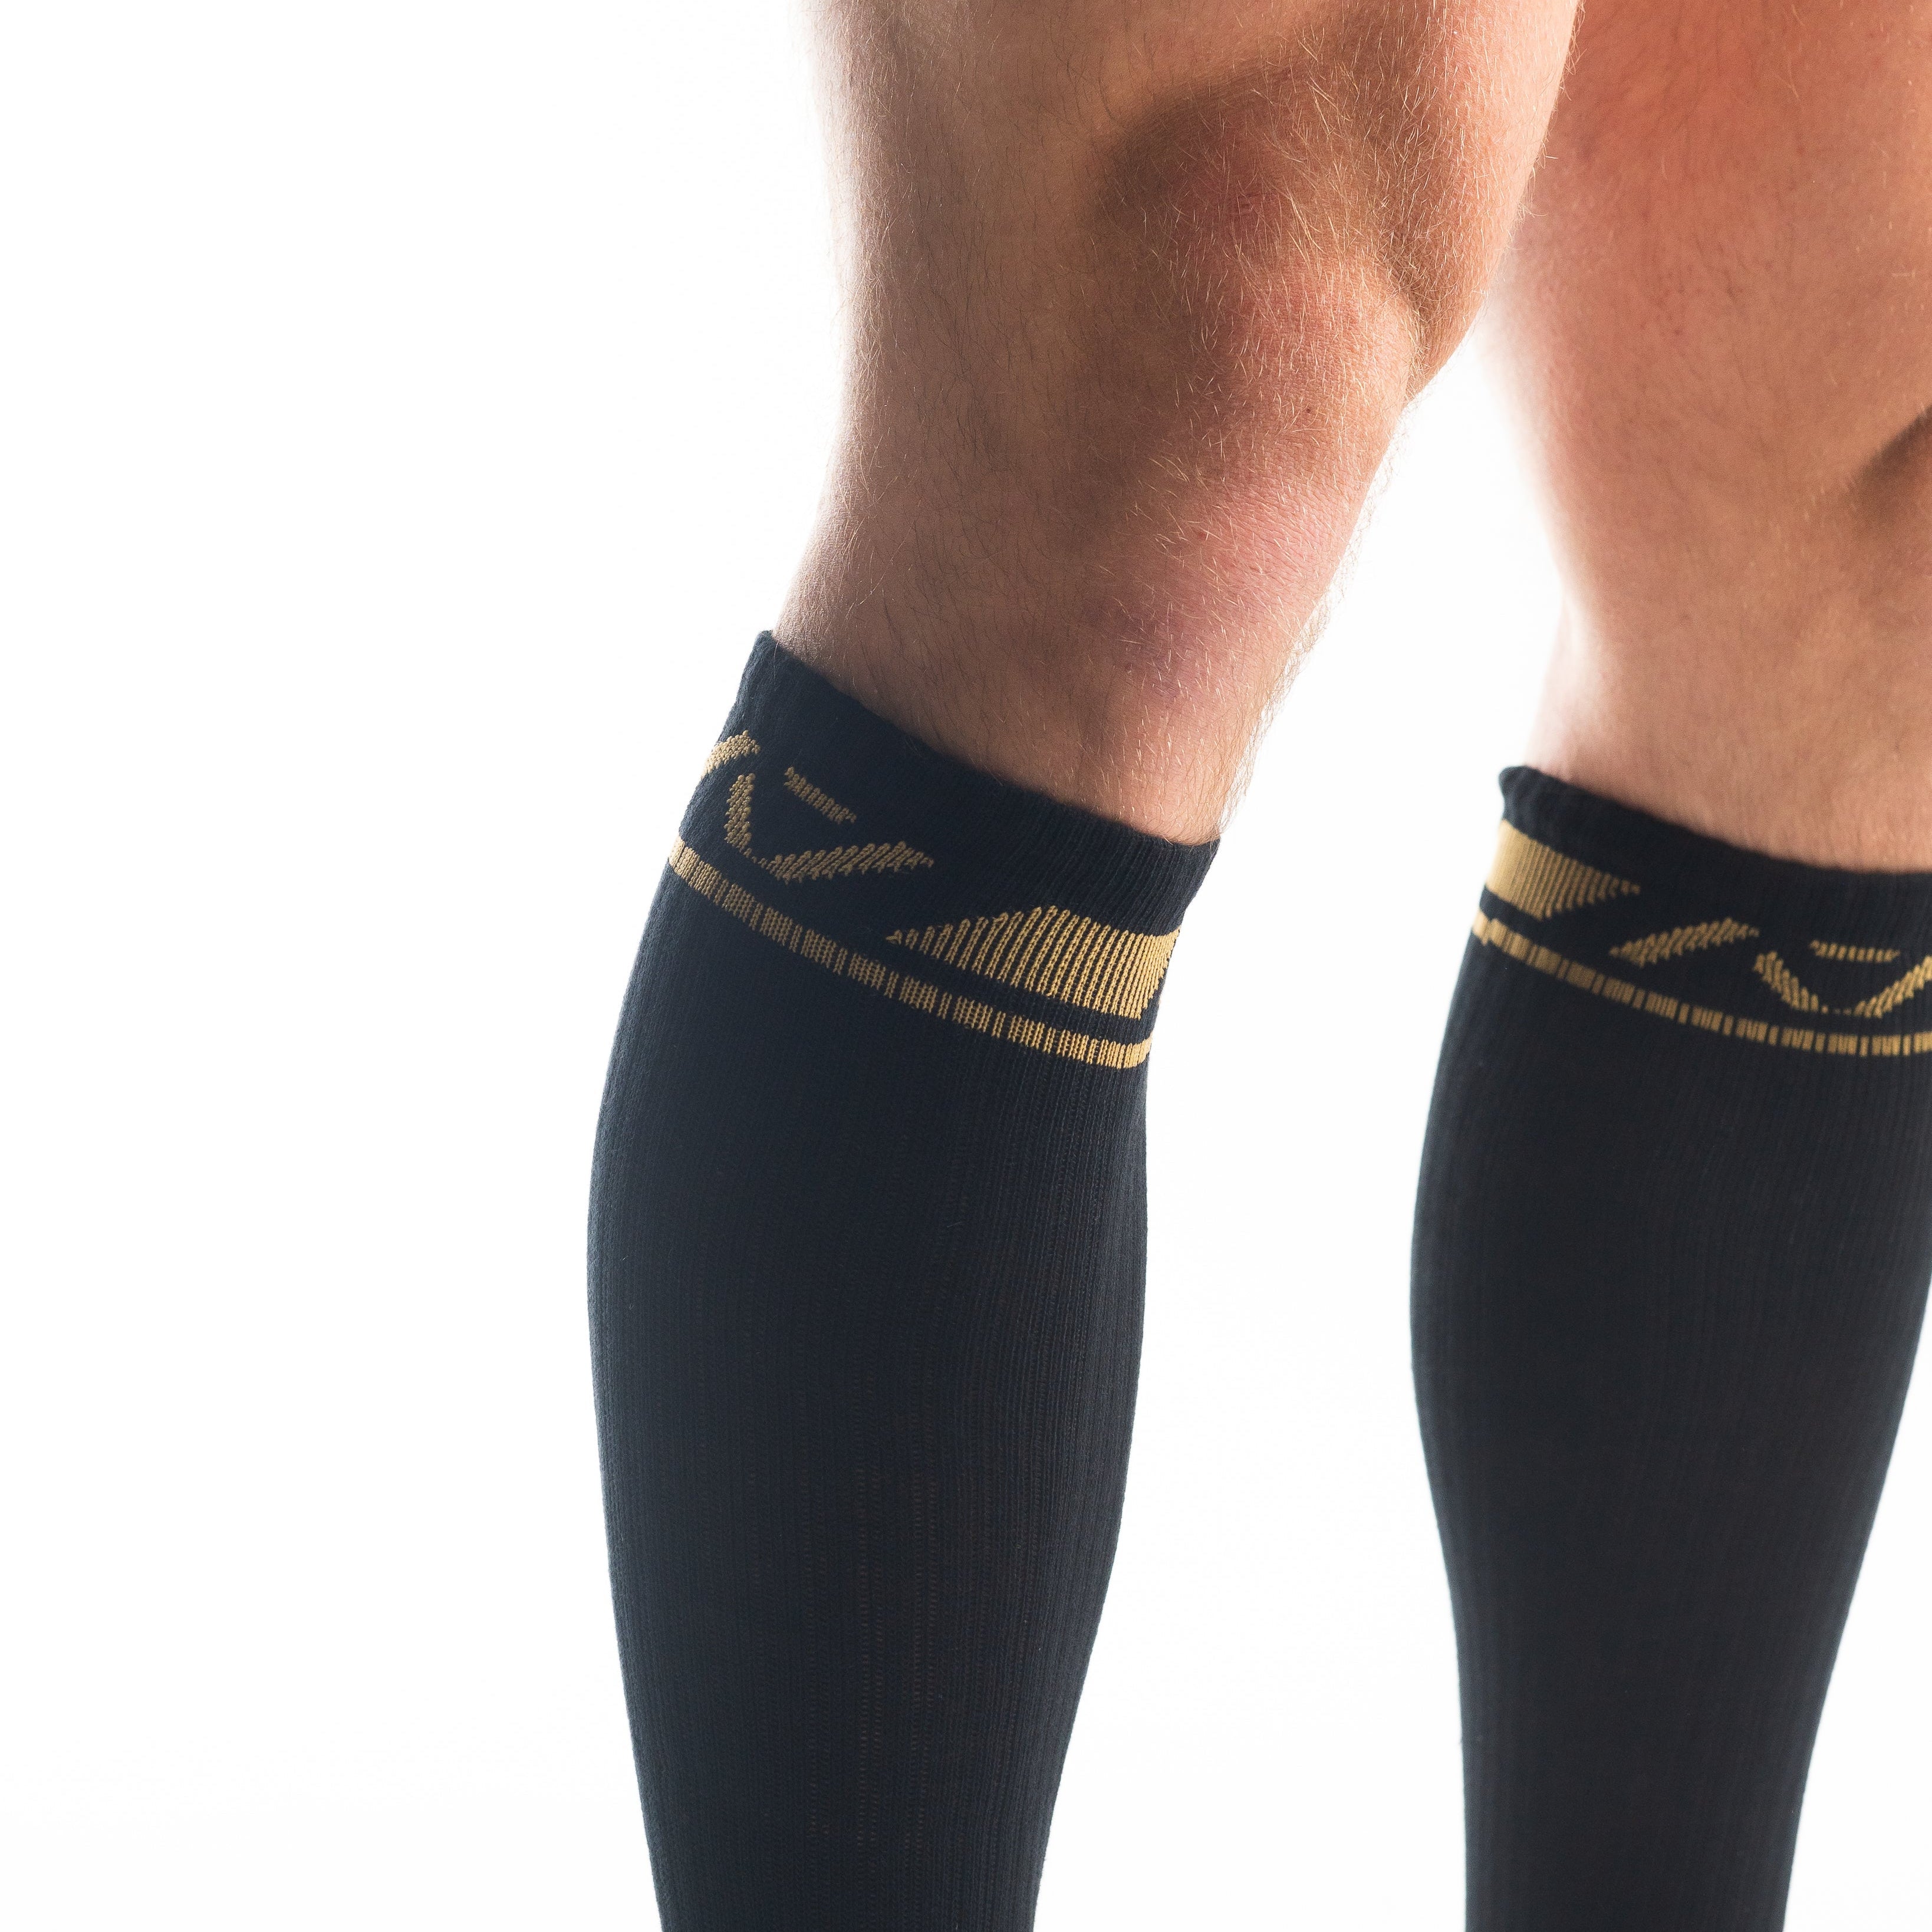 A7 Gold Standard Deadlift socks are designed specifically for pulls and keep your shins protected from scrapes. A7 deadlift socks are a perfect pair to wear in training or powerlifting competition. The IPF Approved Kit includes Powerlifting Singlet, A7 Meet Shirt, A7 Zebra Wrist Wraps, A7 Deadlift Socks, Hourglass Knee Sleeves (Stiff Knee Sleeves and Rigor Mortis Knee Sleeves). Genouillères powerlifting shipping to France, Spain, Ireland, Germany, Italy, Sweden and EU.